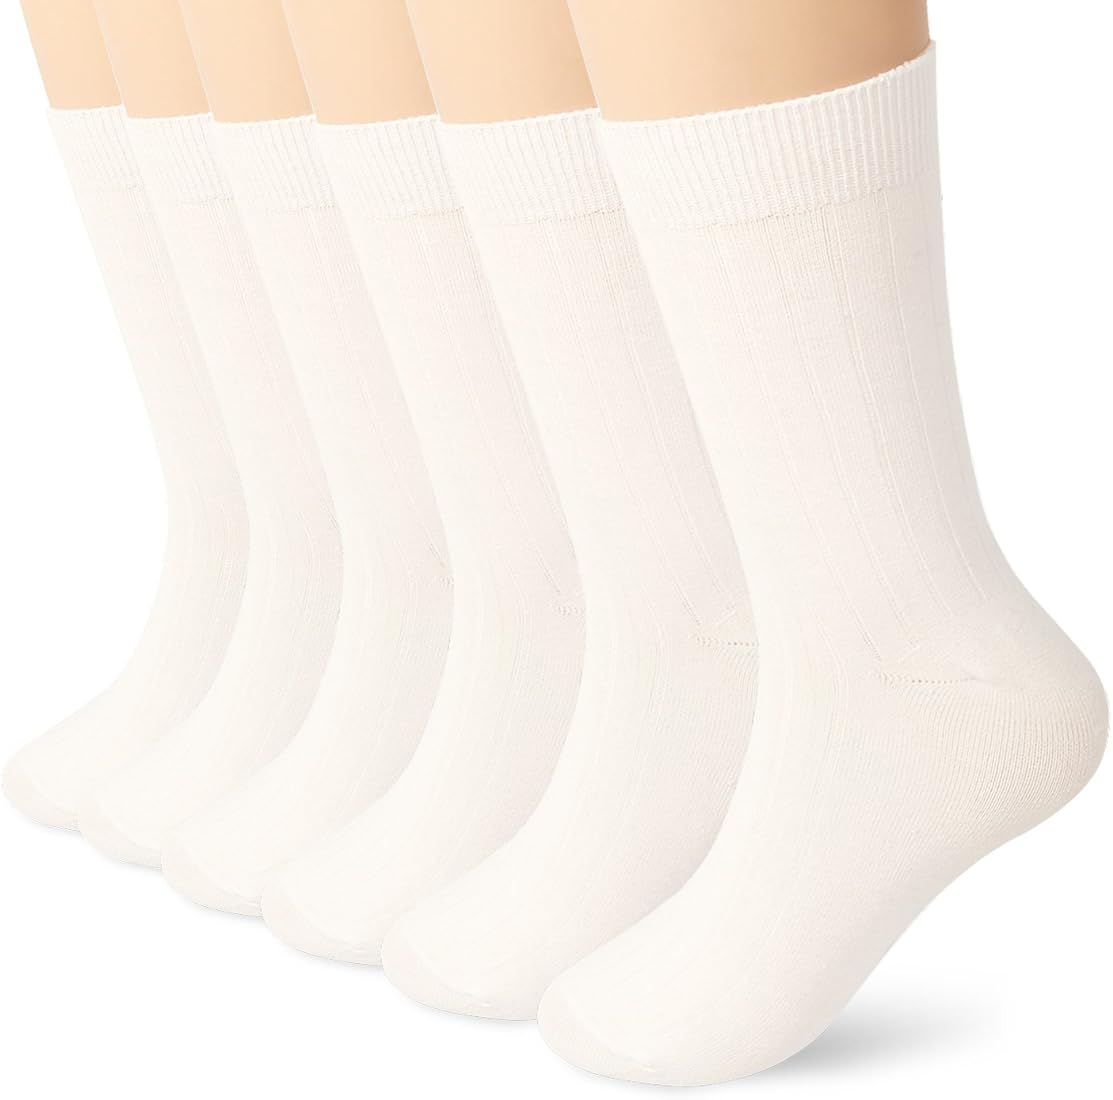 Womens Thin Cotton Crew Socks High Ankle 6 Pack | Amazon (US)